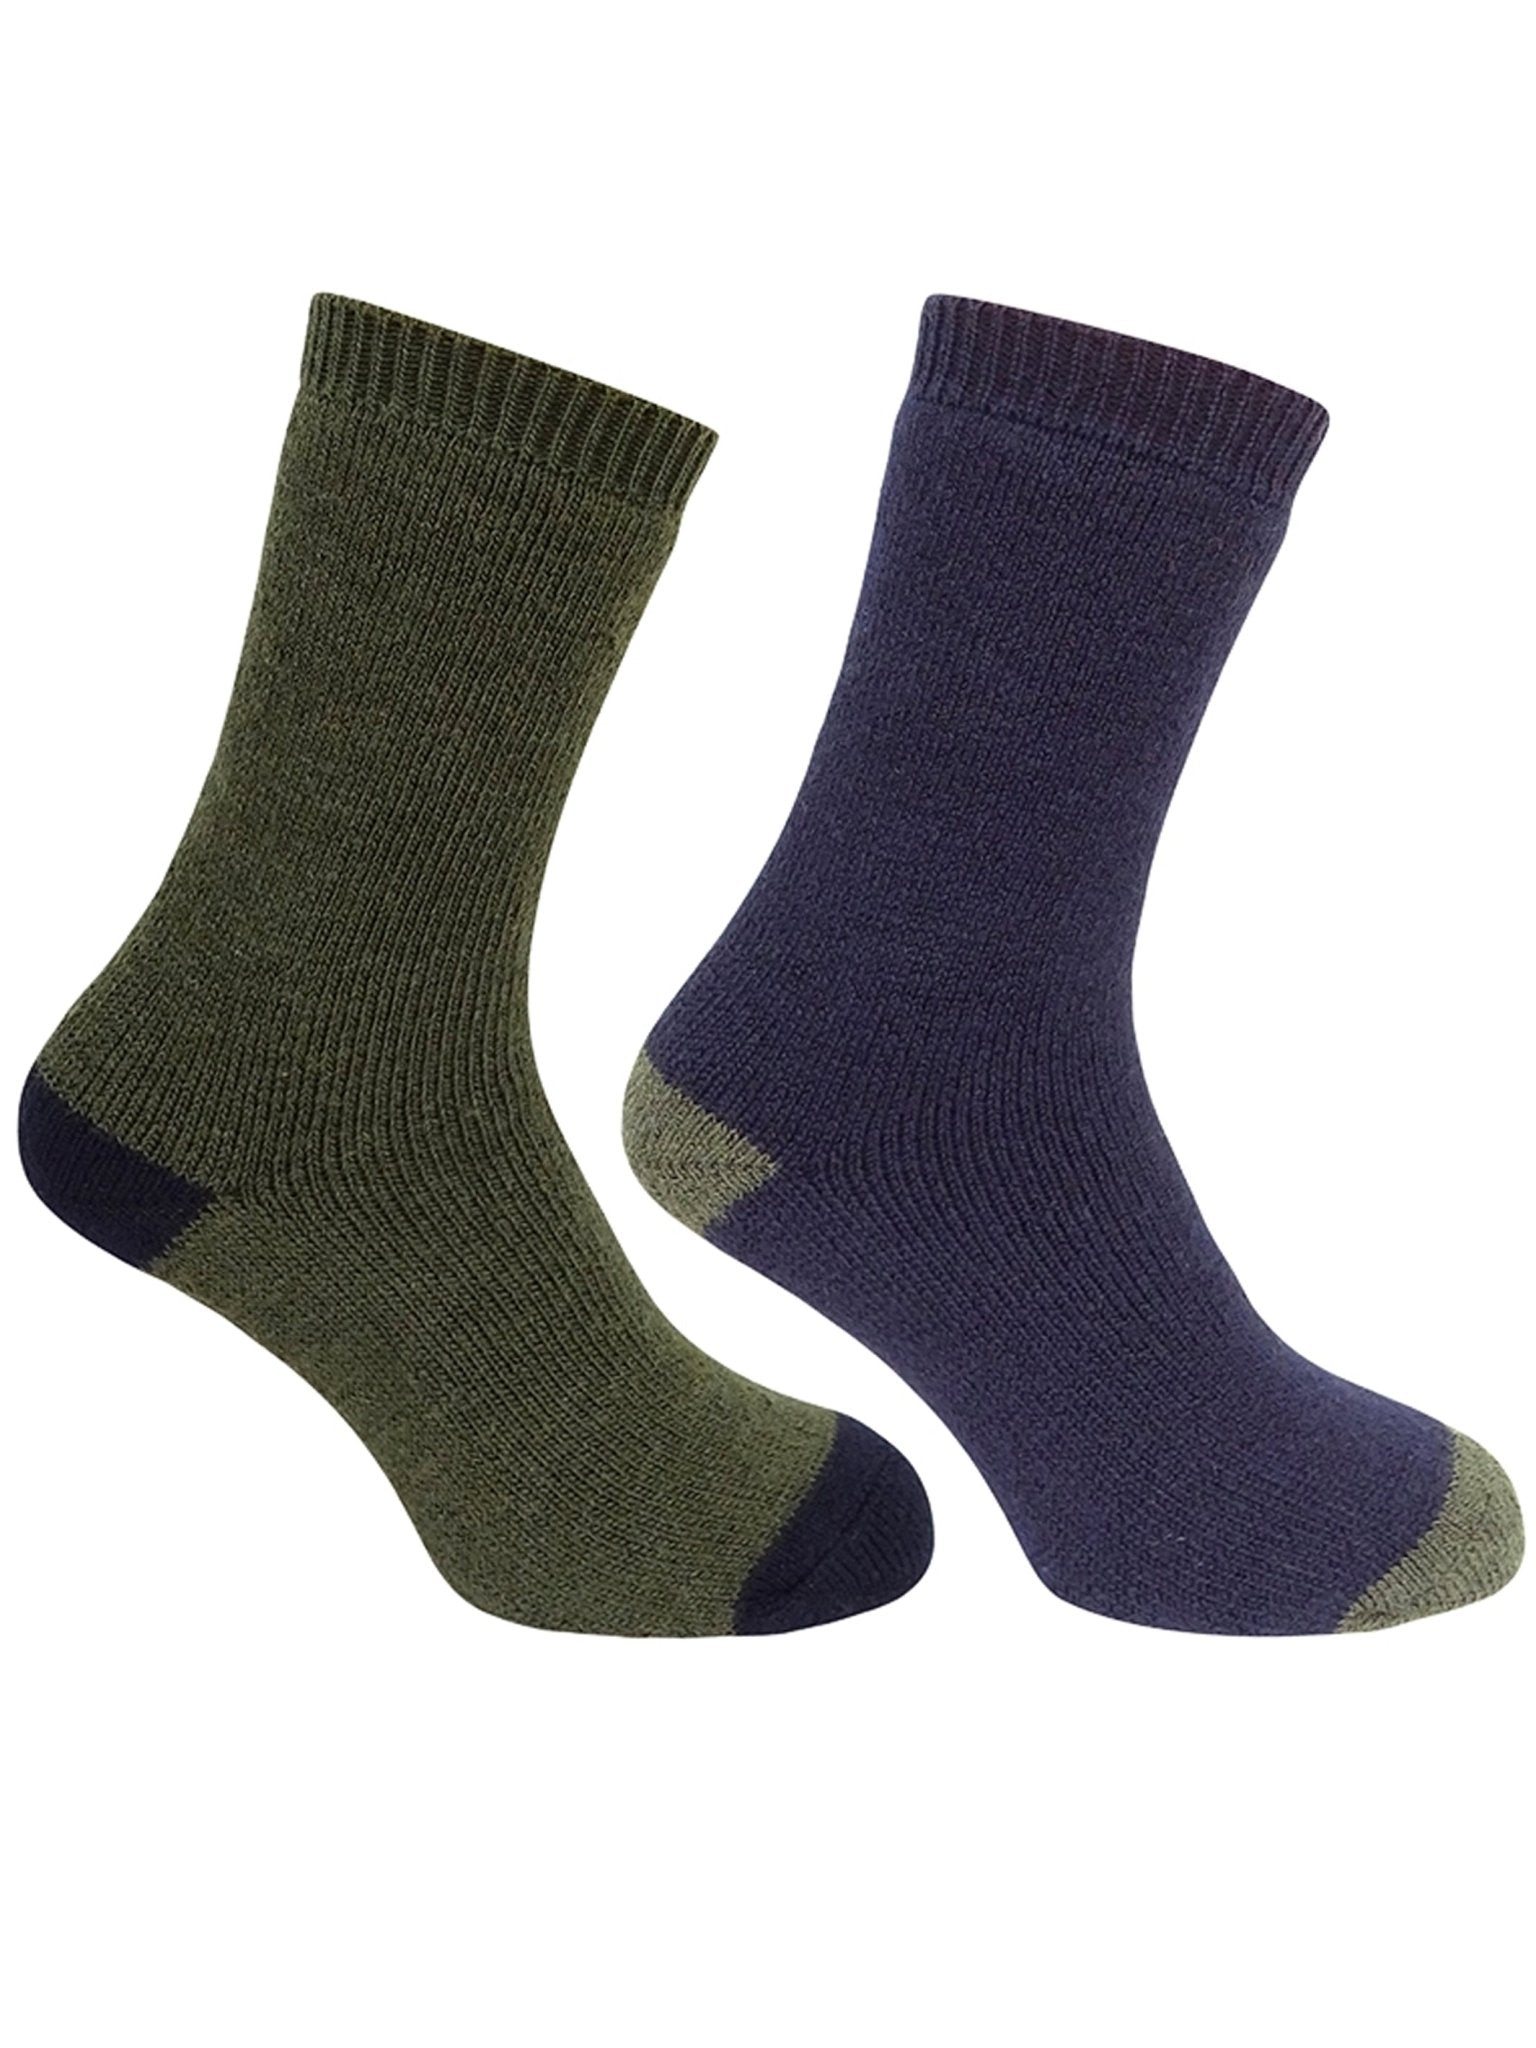 4elementsclothingHoggs of FifeHoggs of Fife - 1904 Short Country Mens Socks (Twin Pack Socks) - Tech ActiveSocks1904/NG/1